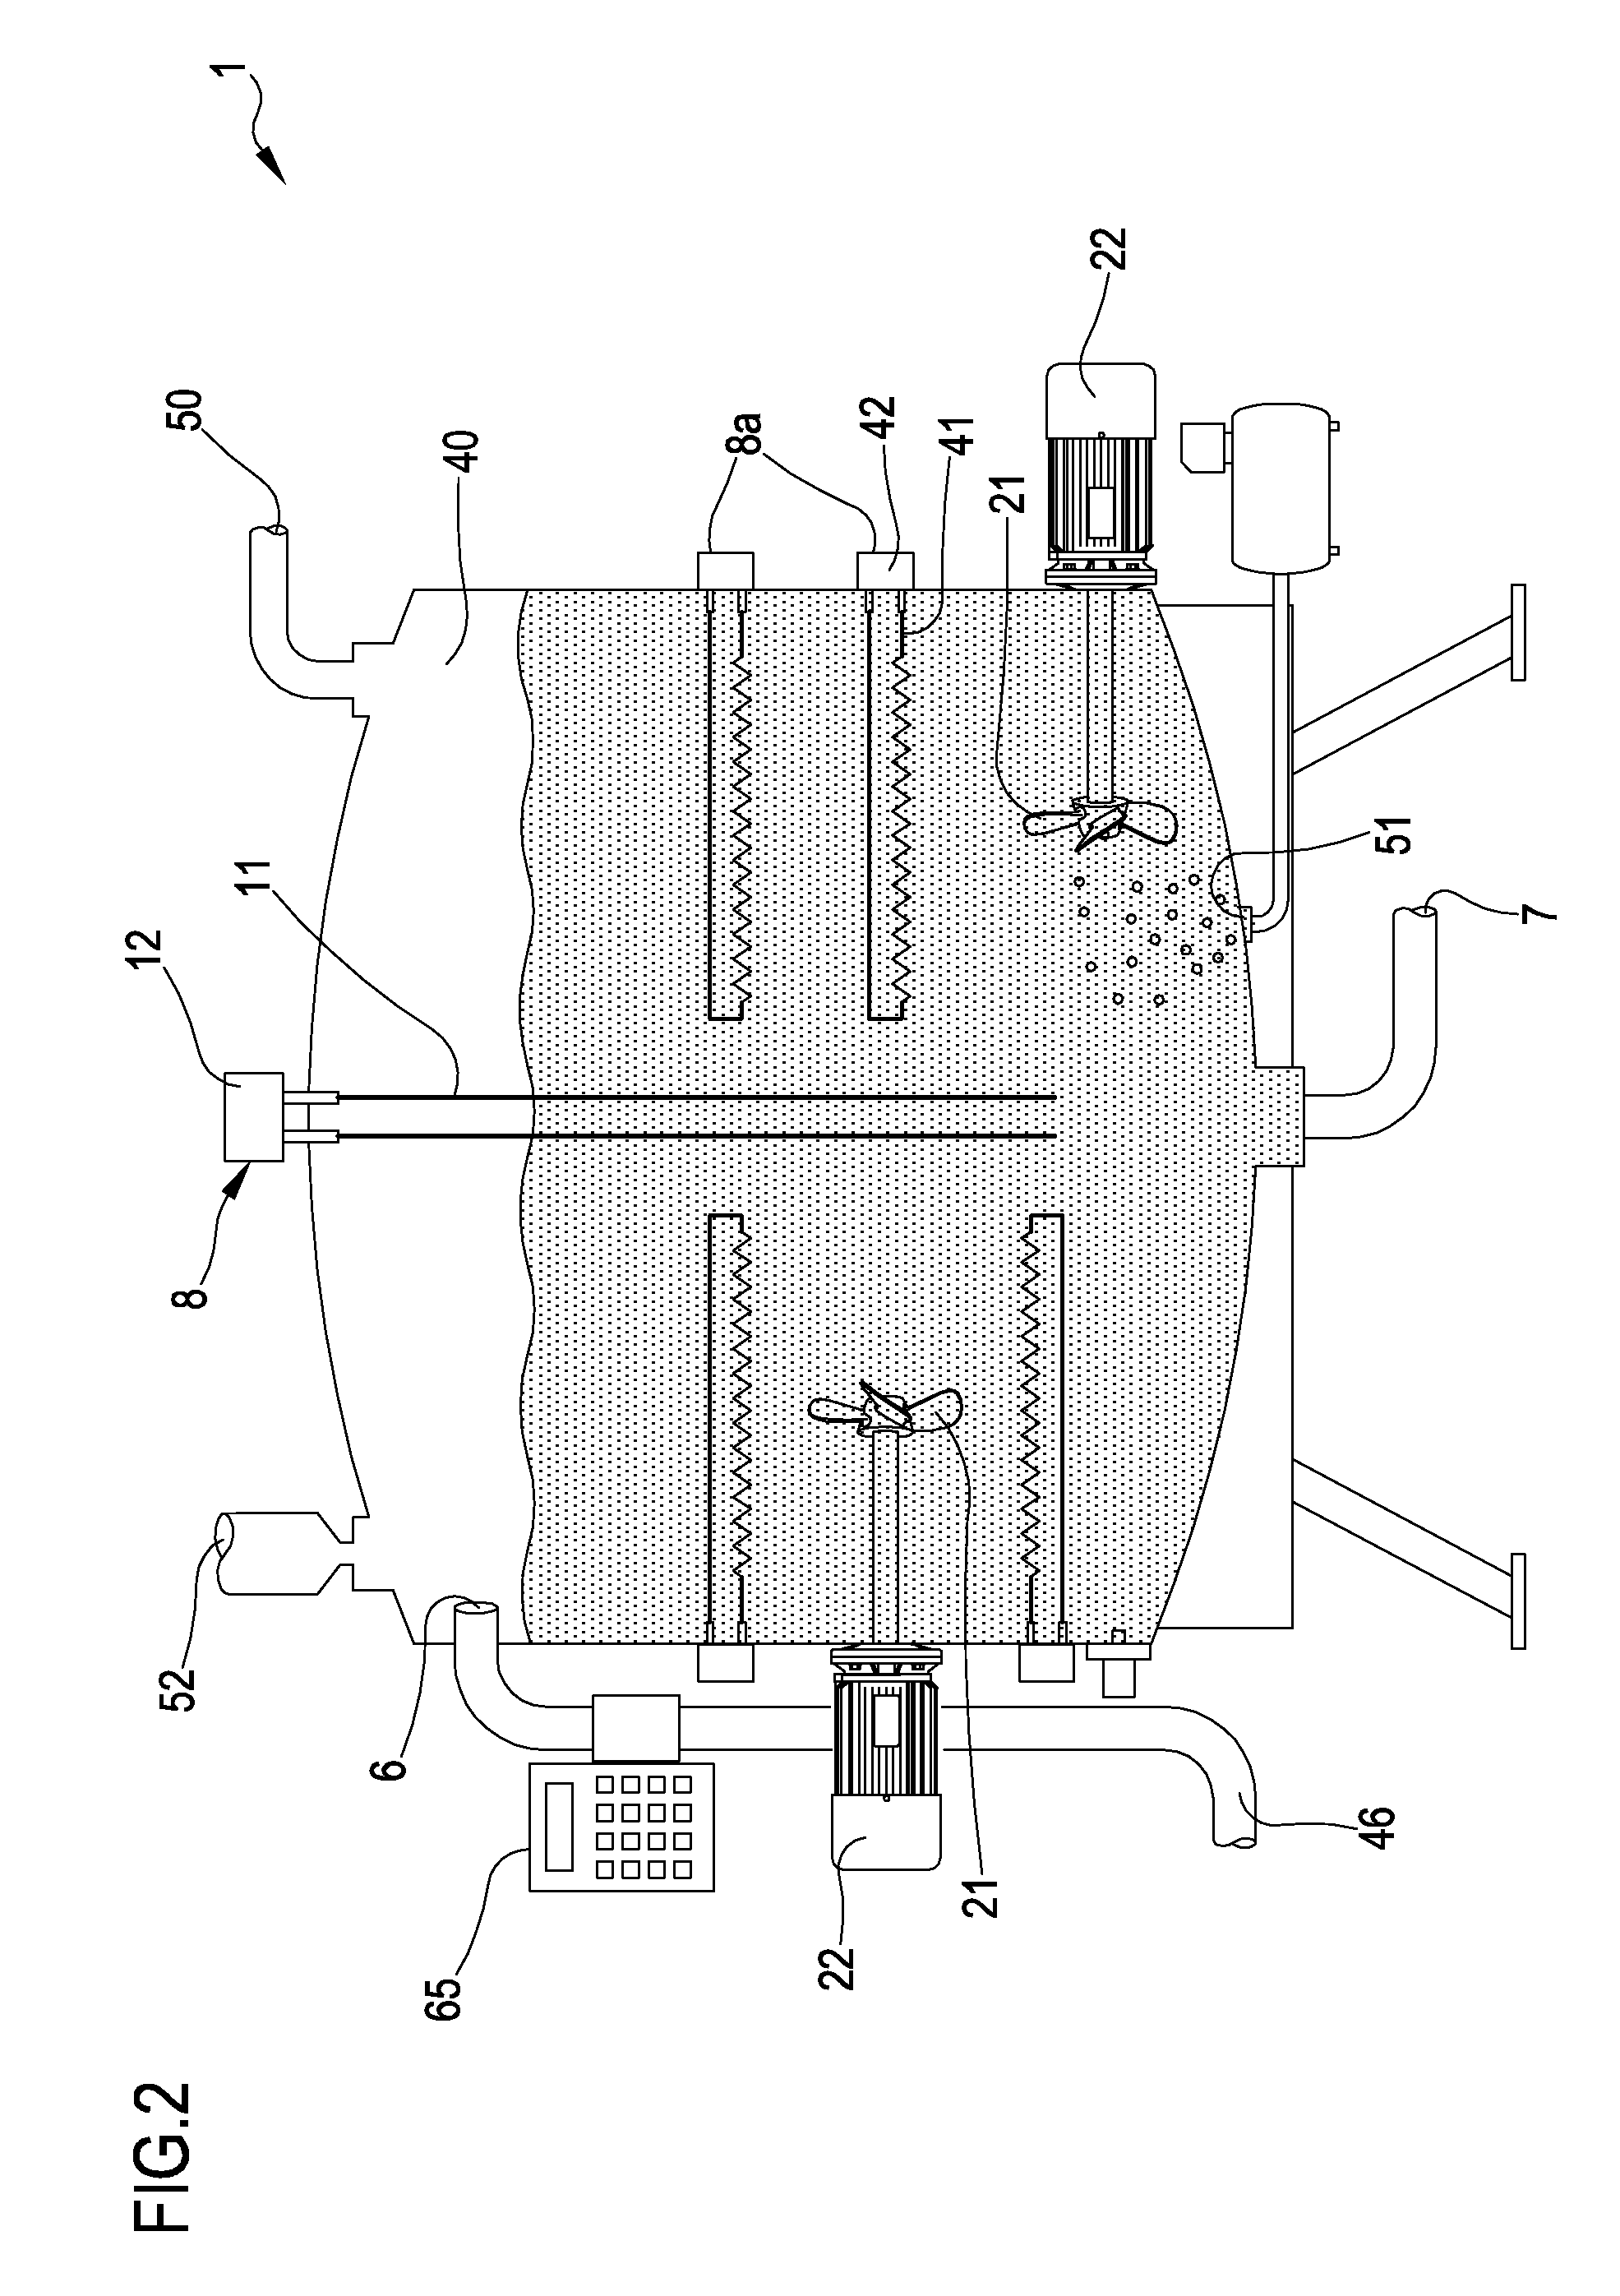 Method and apparatus for treating sewage